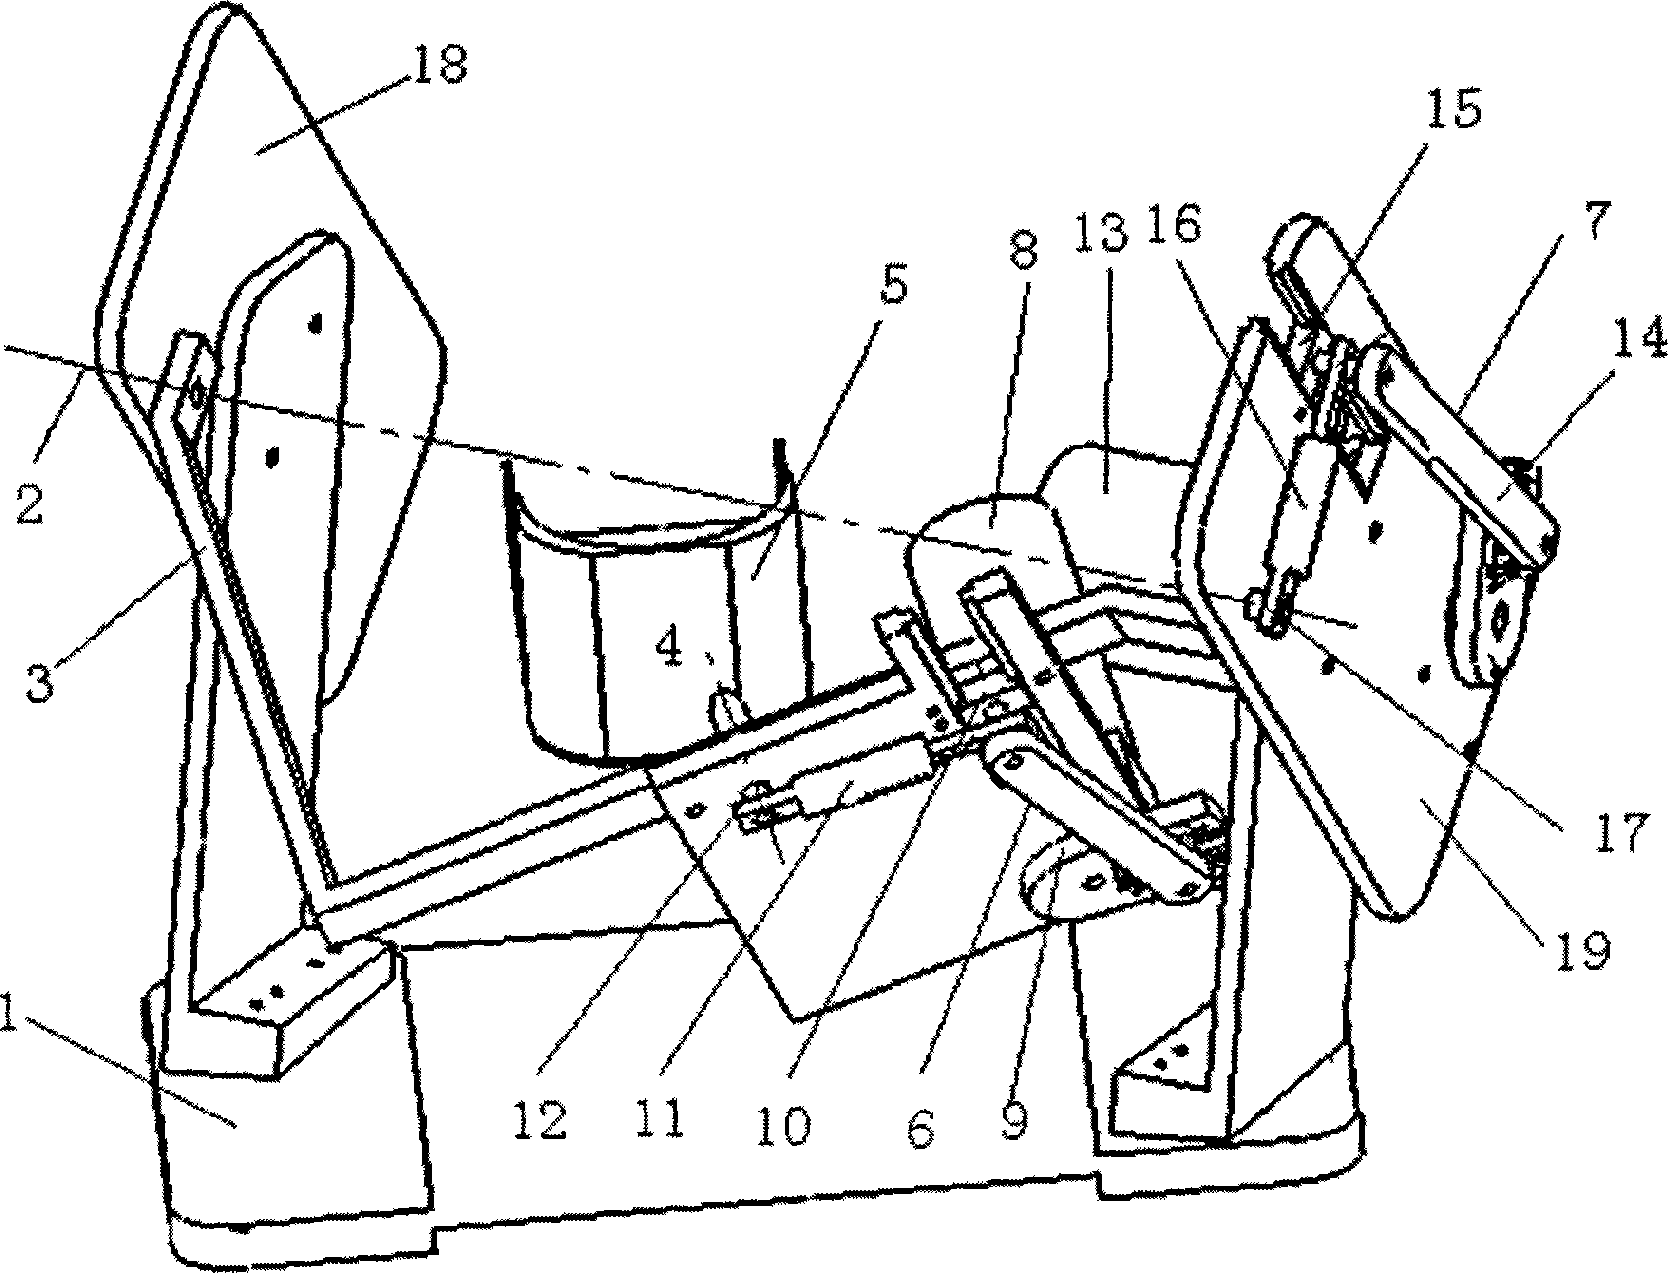 Ankle rehabiliation apparatus with double-freedom degree